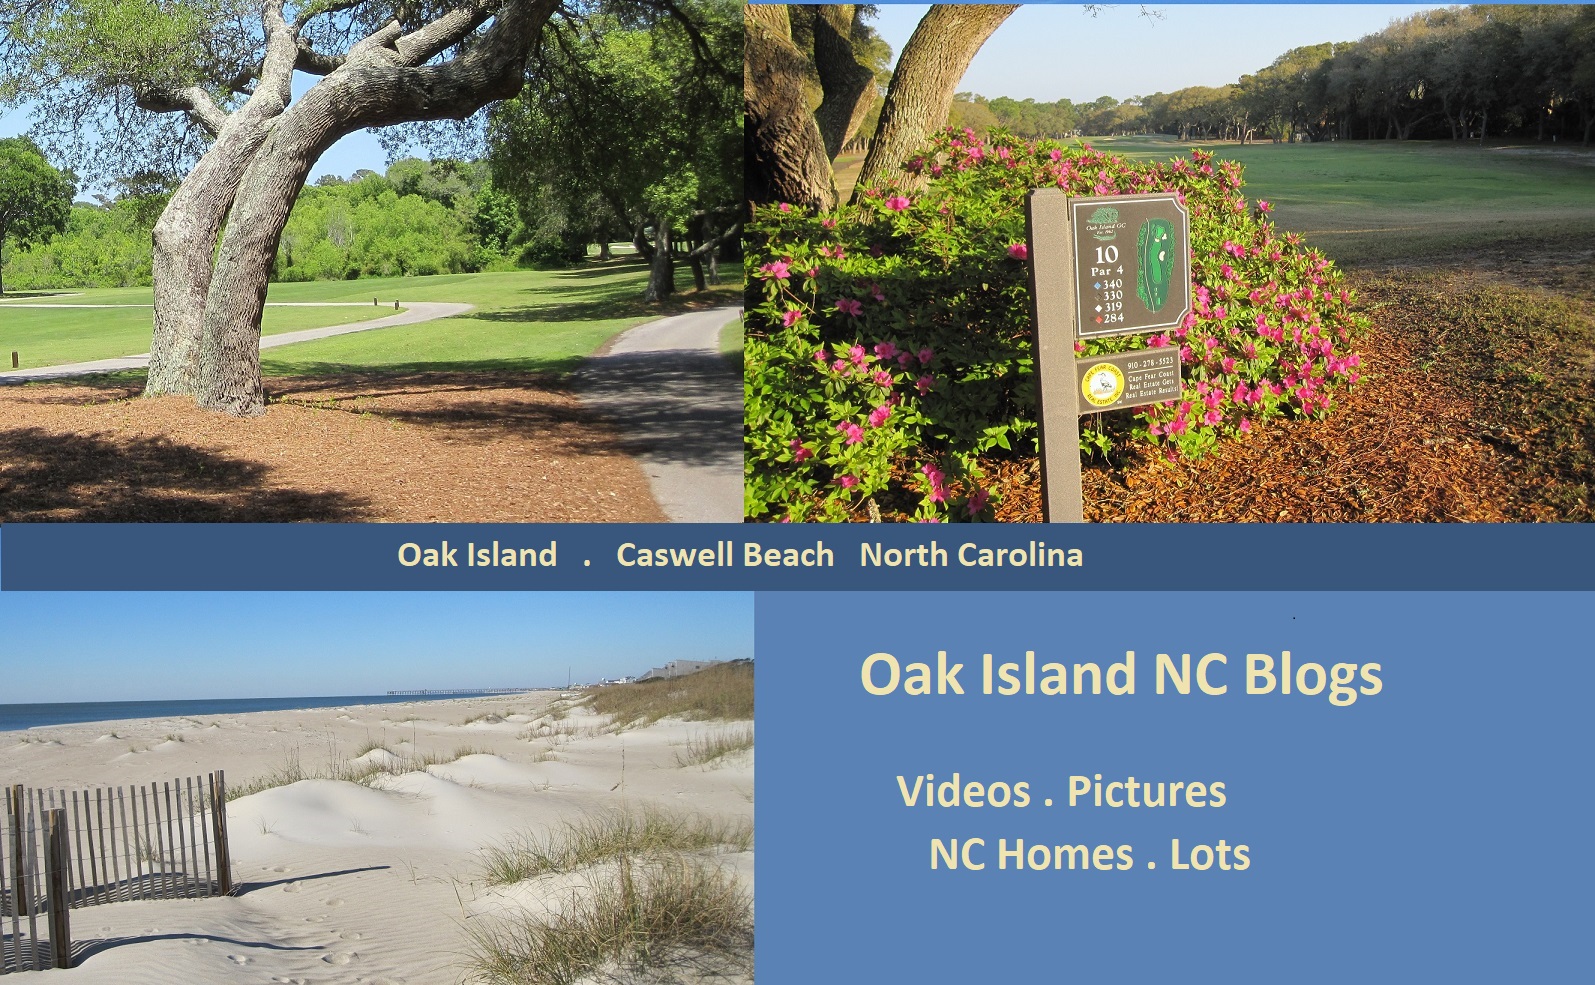 Oak Island NC pictures and blogs